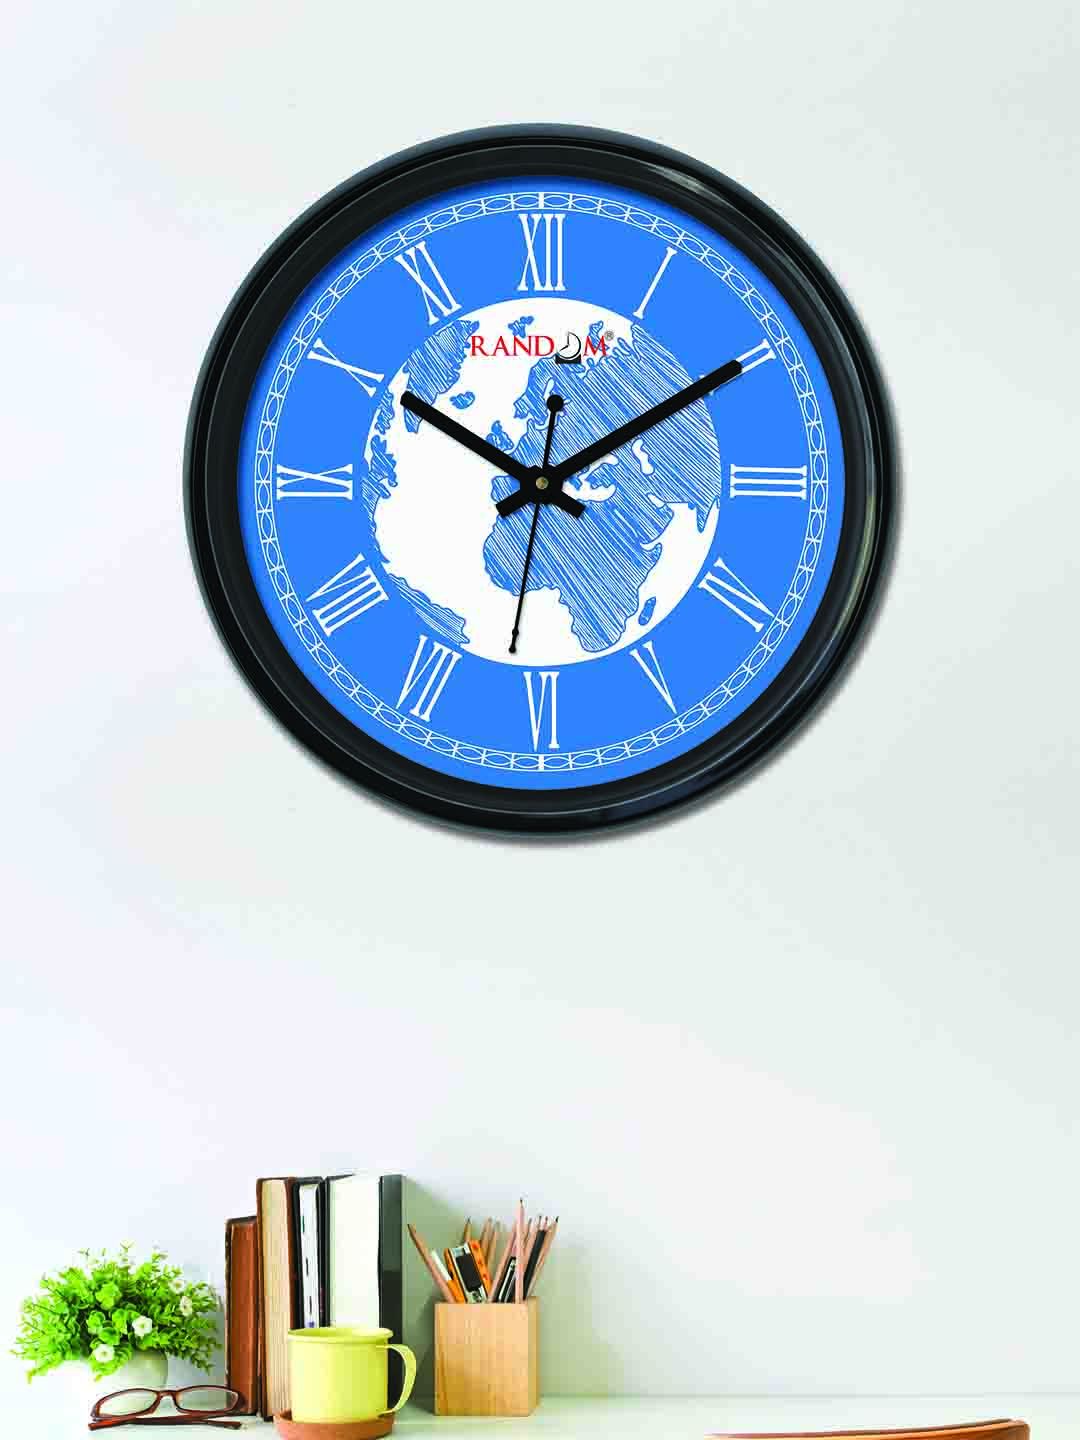 RANDOM Blue & White Round Printed Analogue Wall Clock 30 cm Price in India